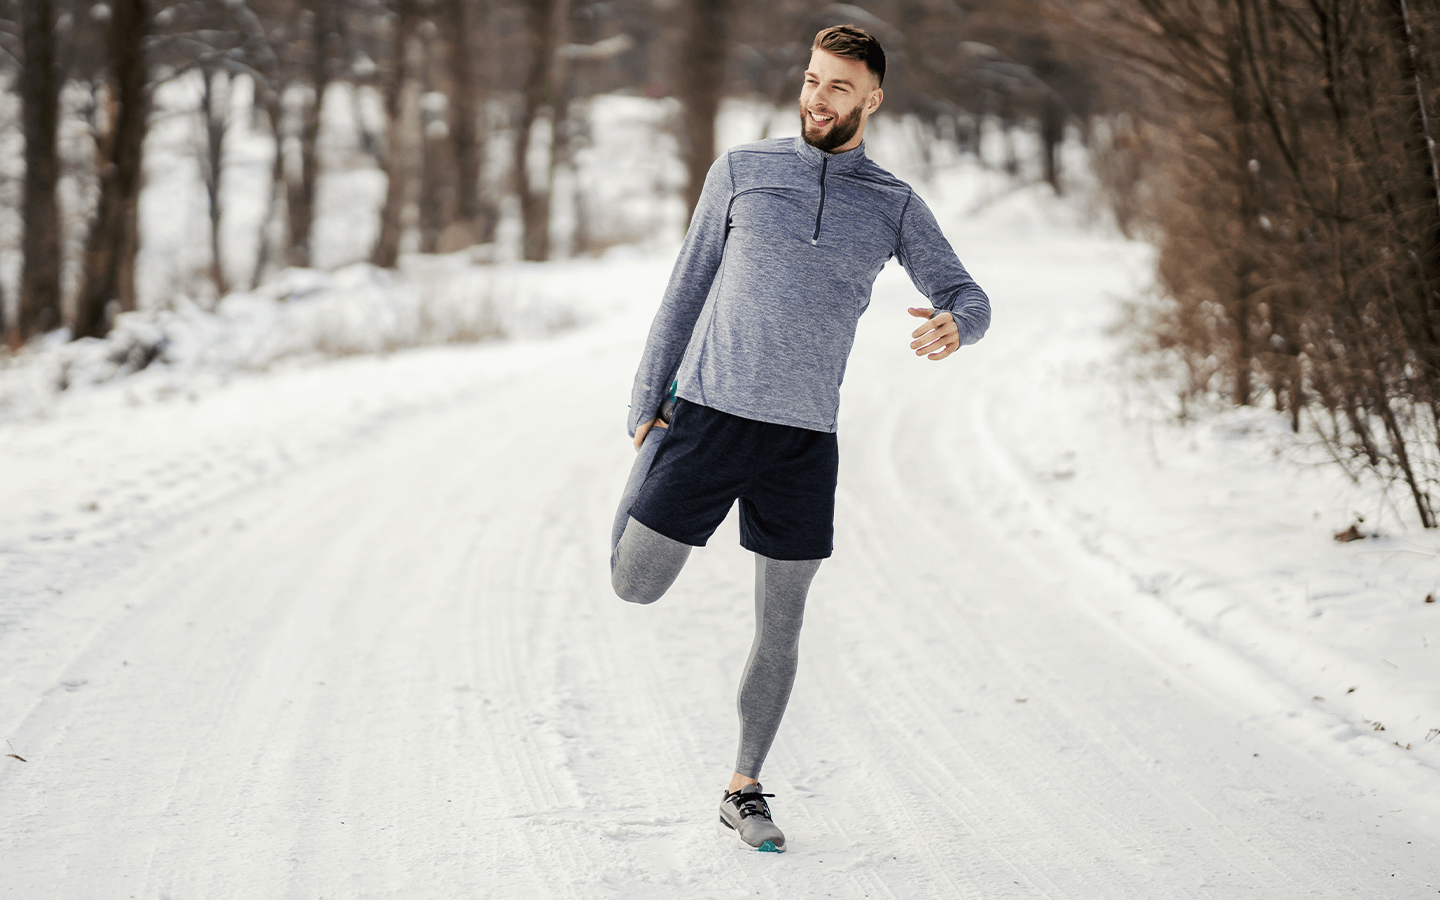 How to Choose the Best Thermal Wear for Winter Sports